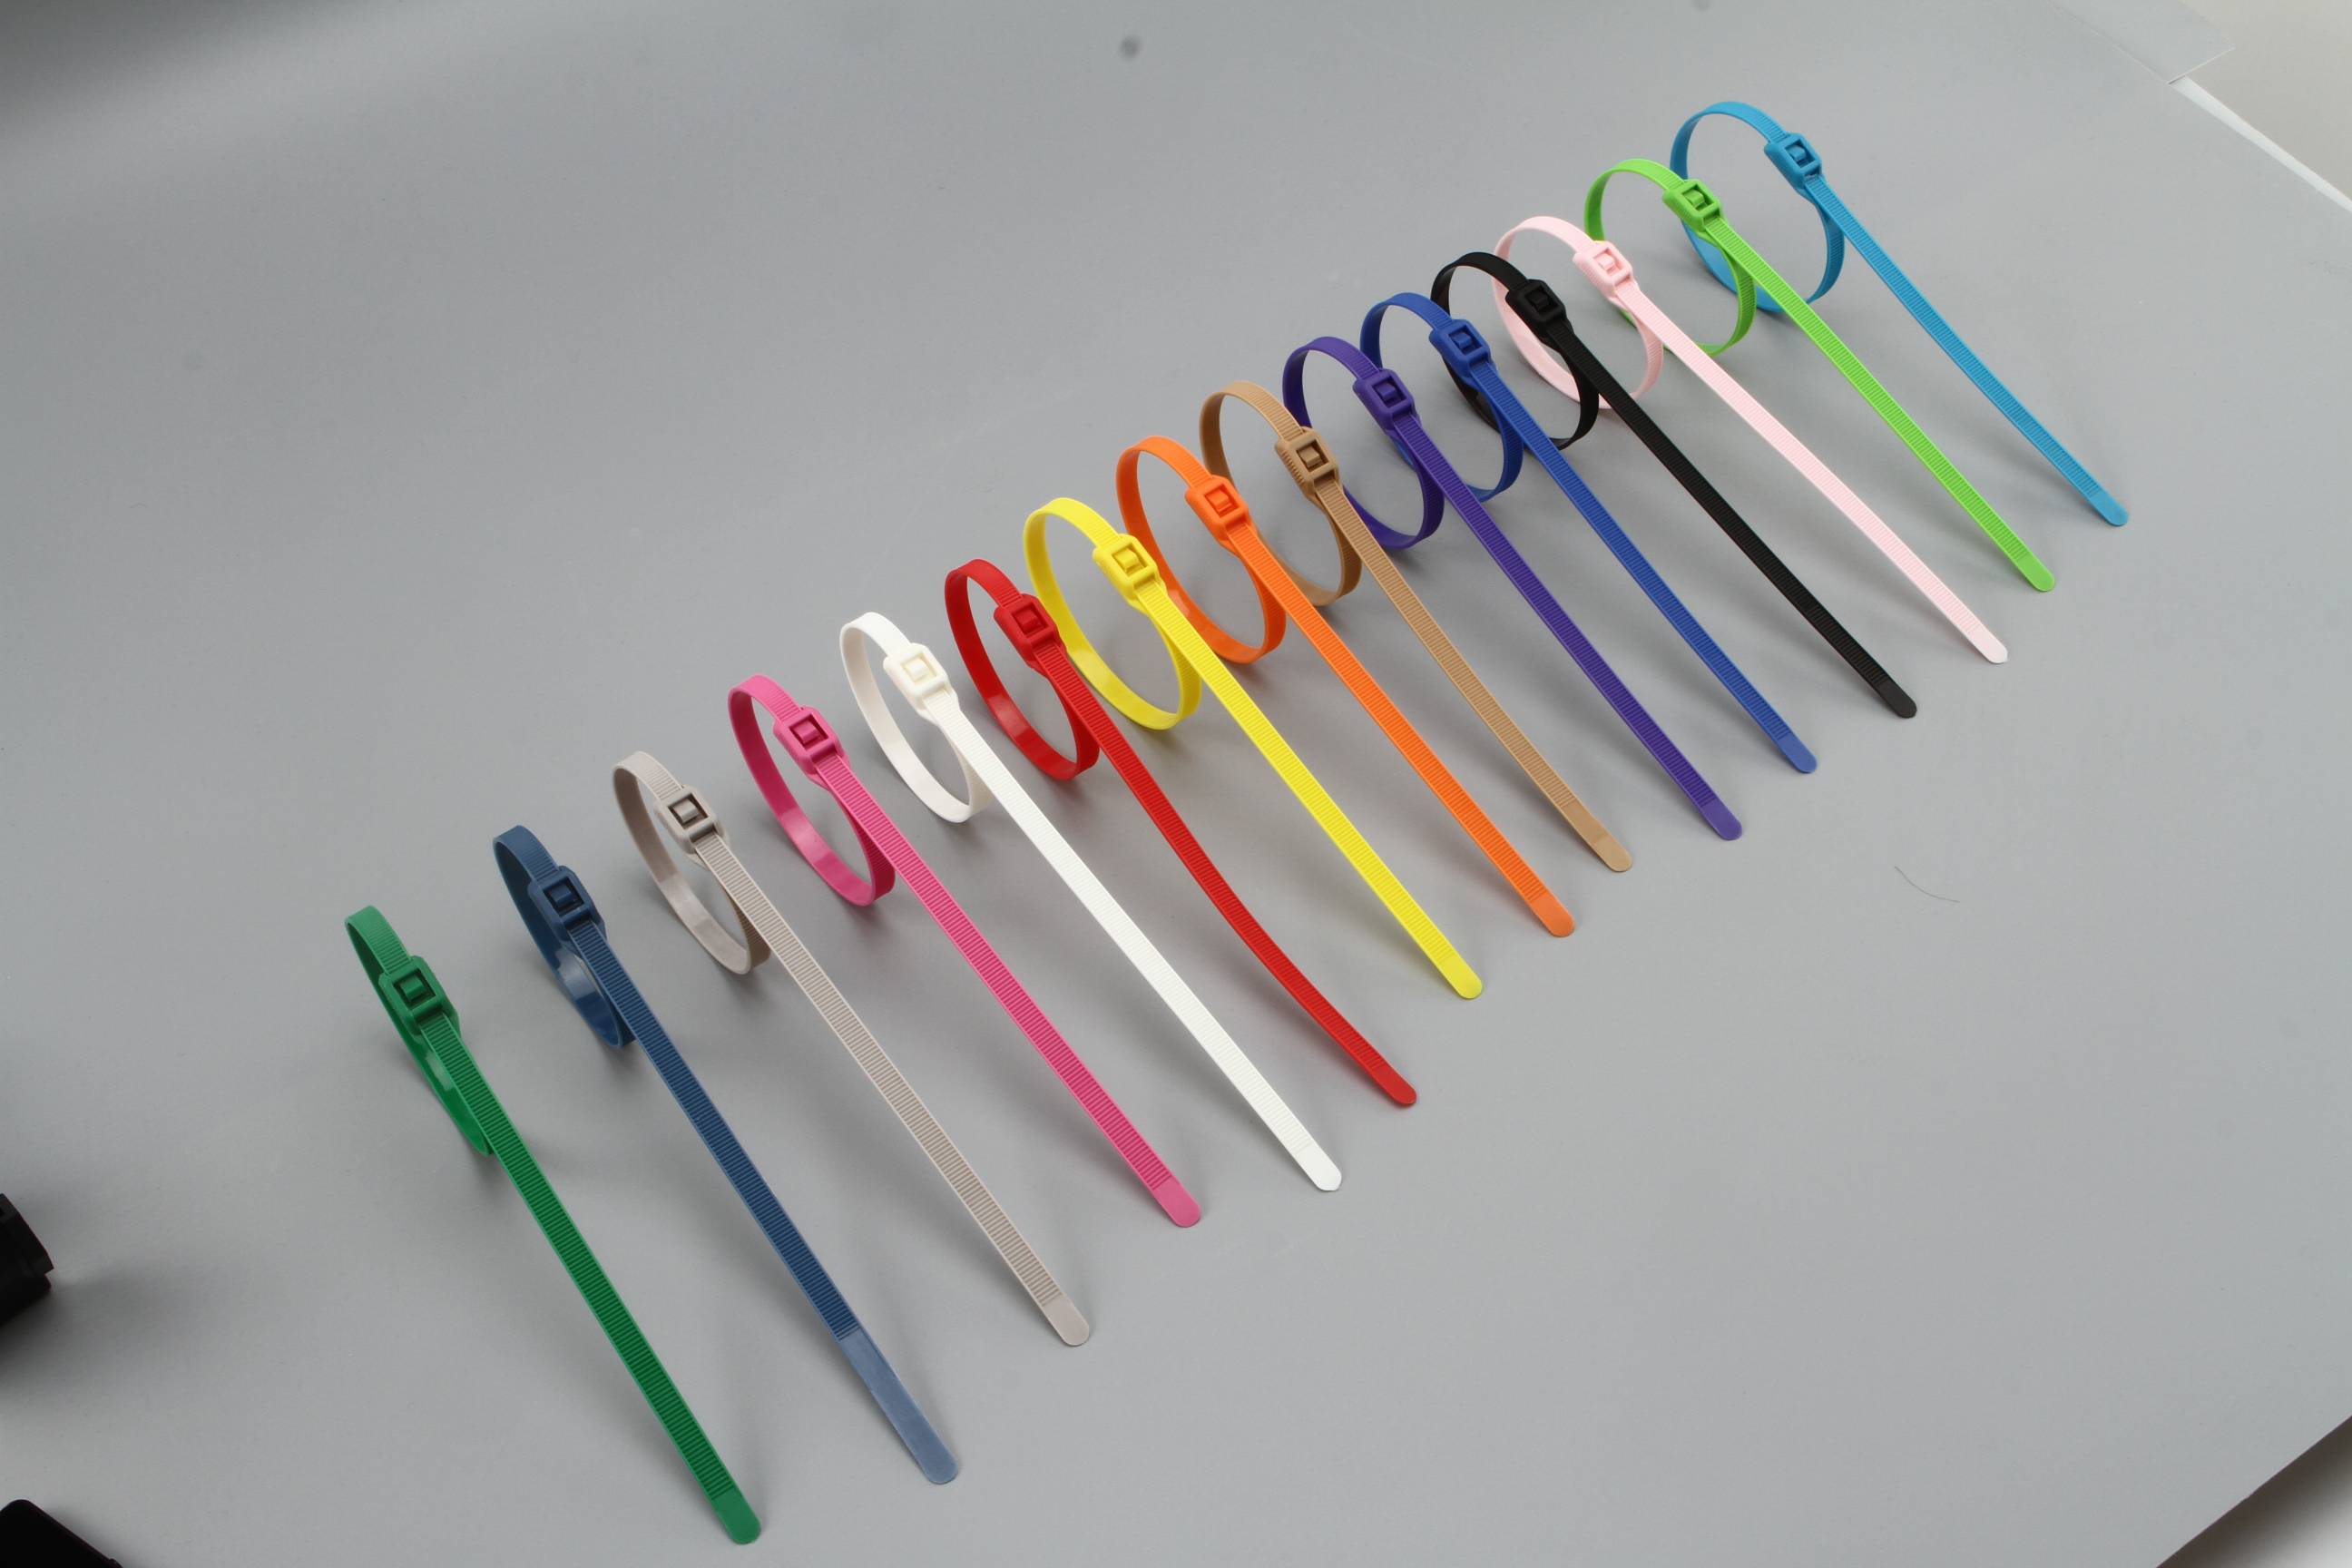 Fishbone cable ties - 2